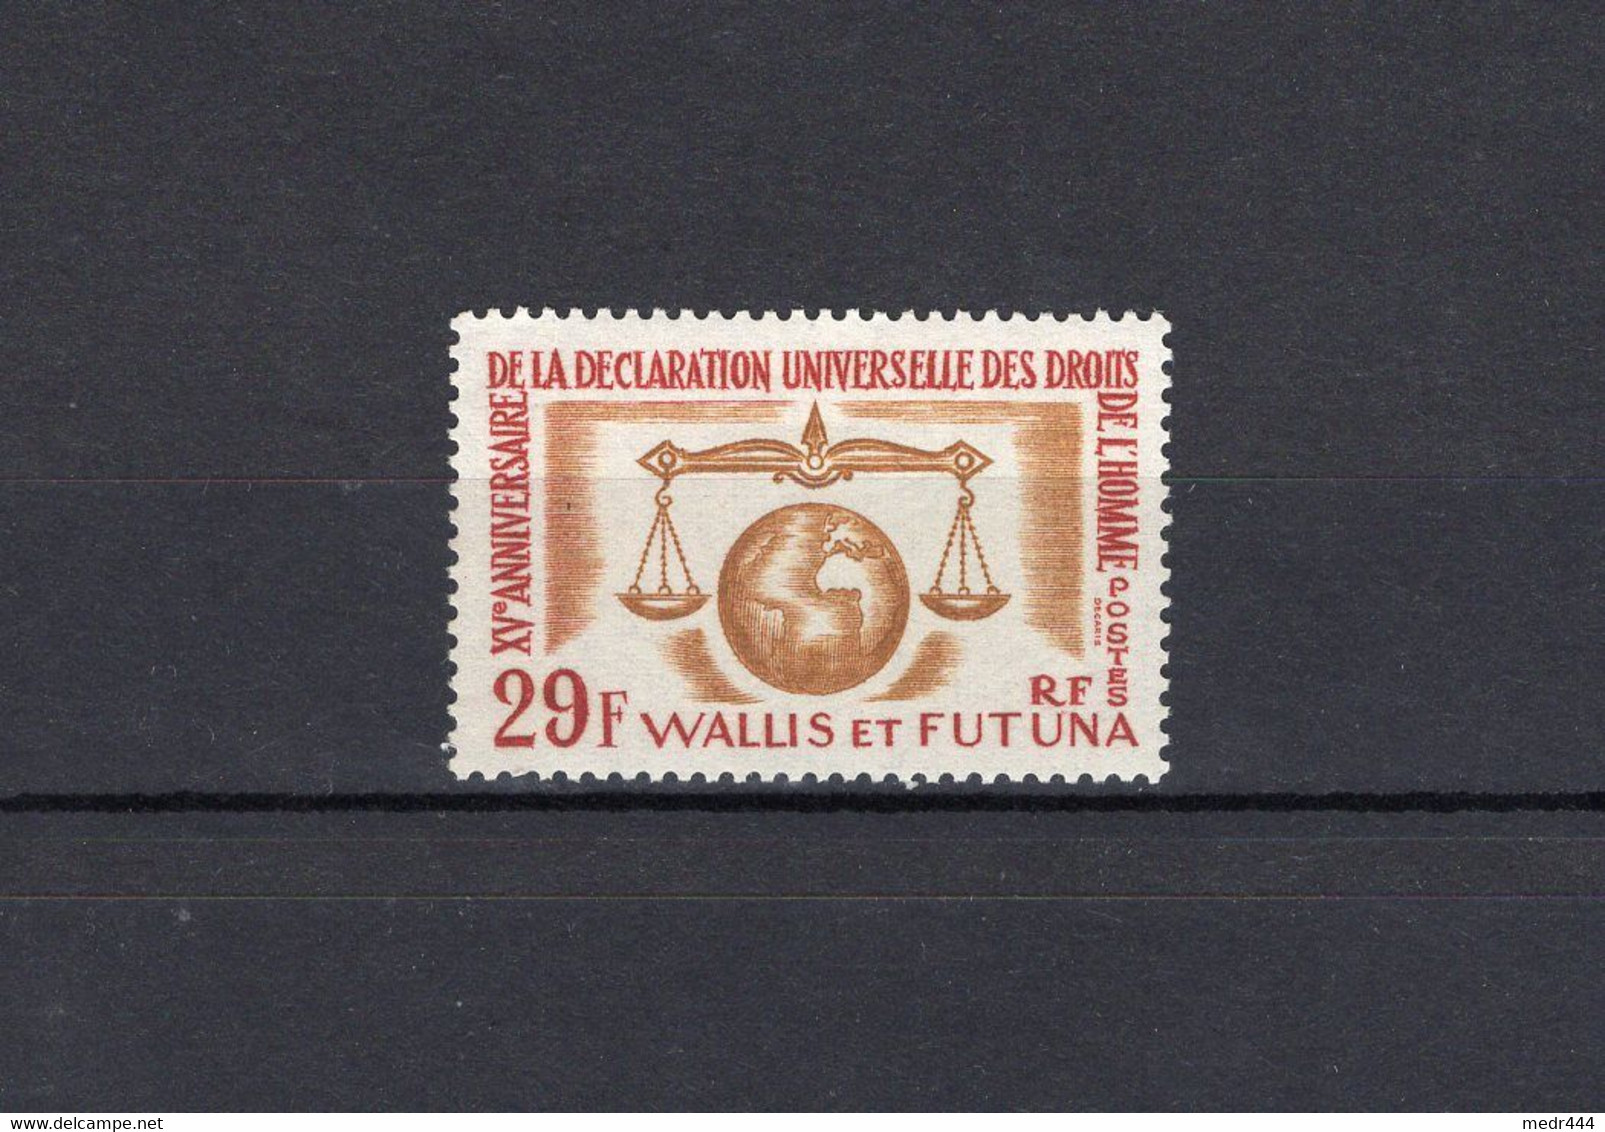 Wallis And Futuna 1963 - The 15th Anniversary Of Human Rights Declaration - Stamp 1v - MNH** - Excellent Quality - Storia Postale